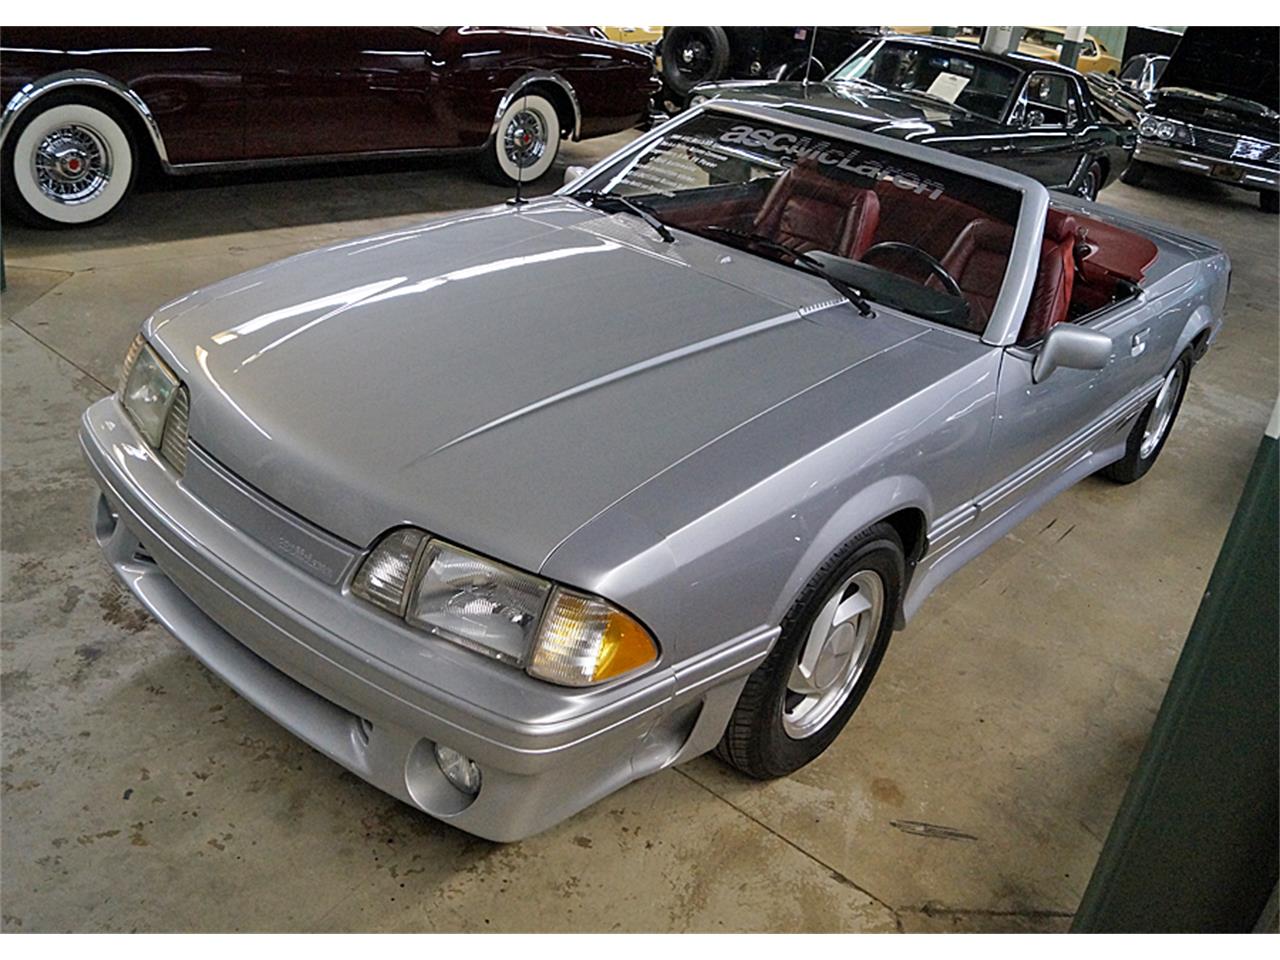 Ford Mustang 1989 For Sale